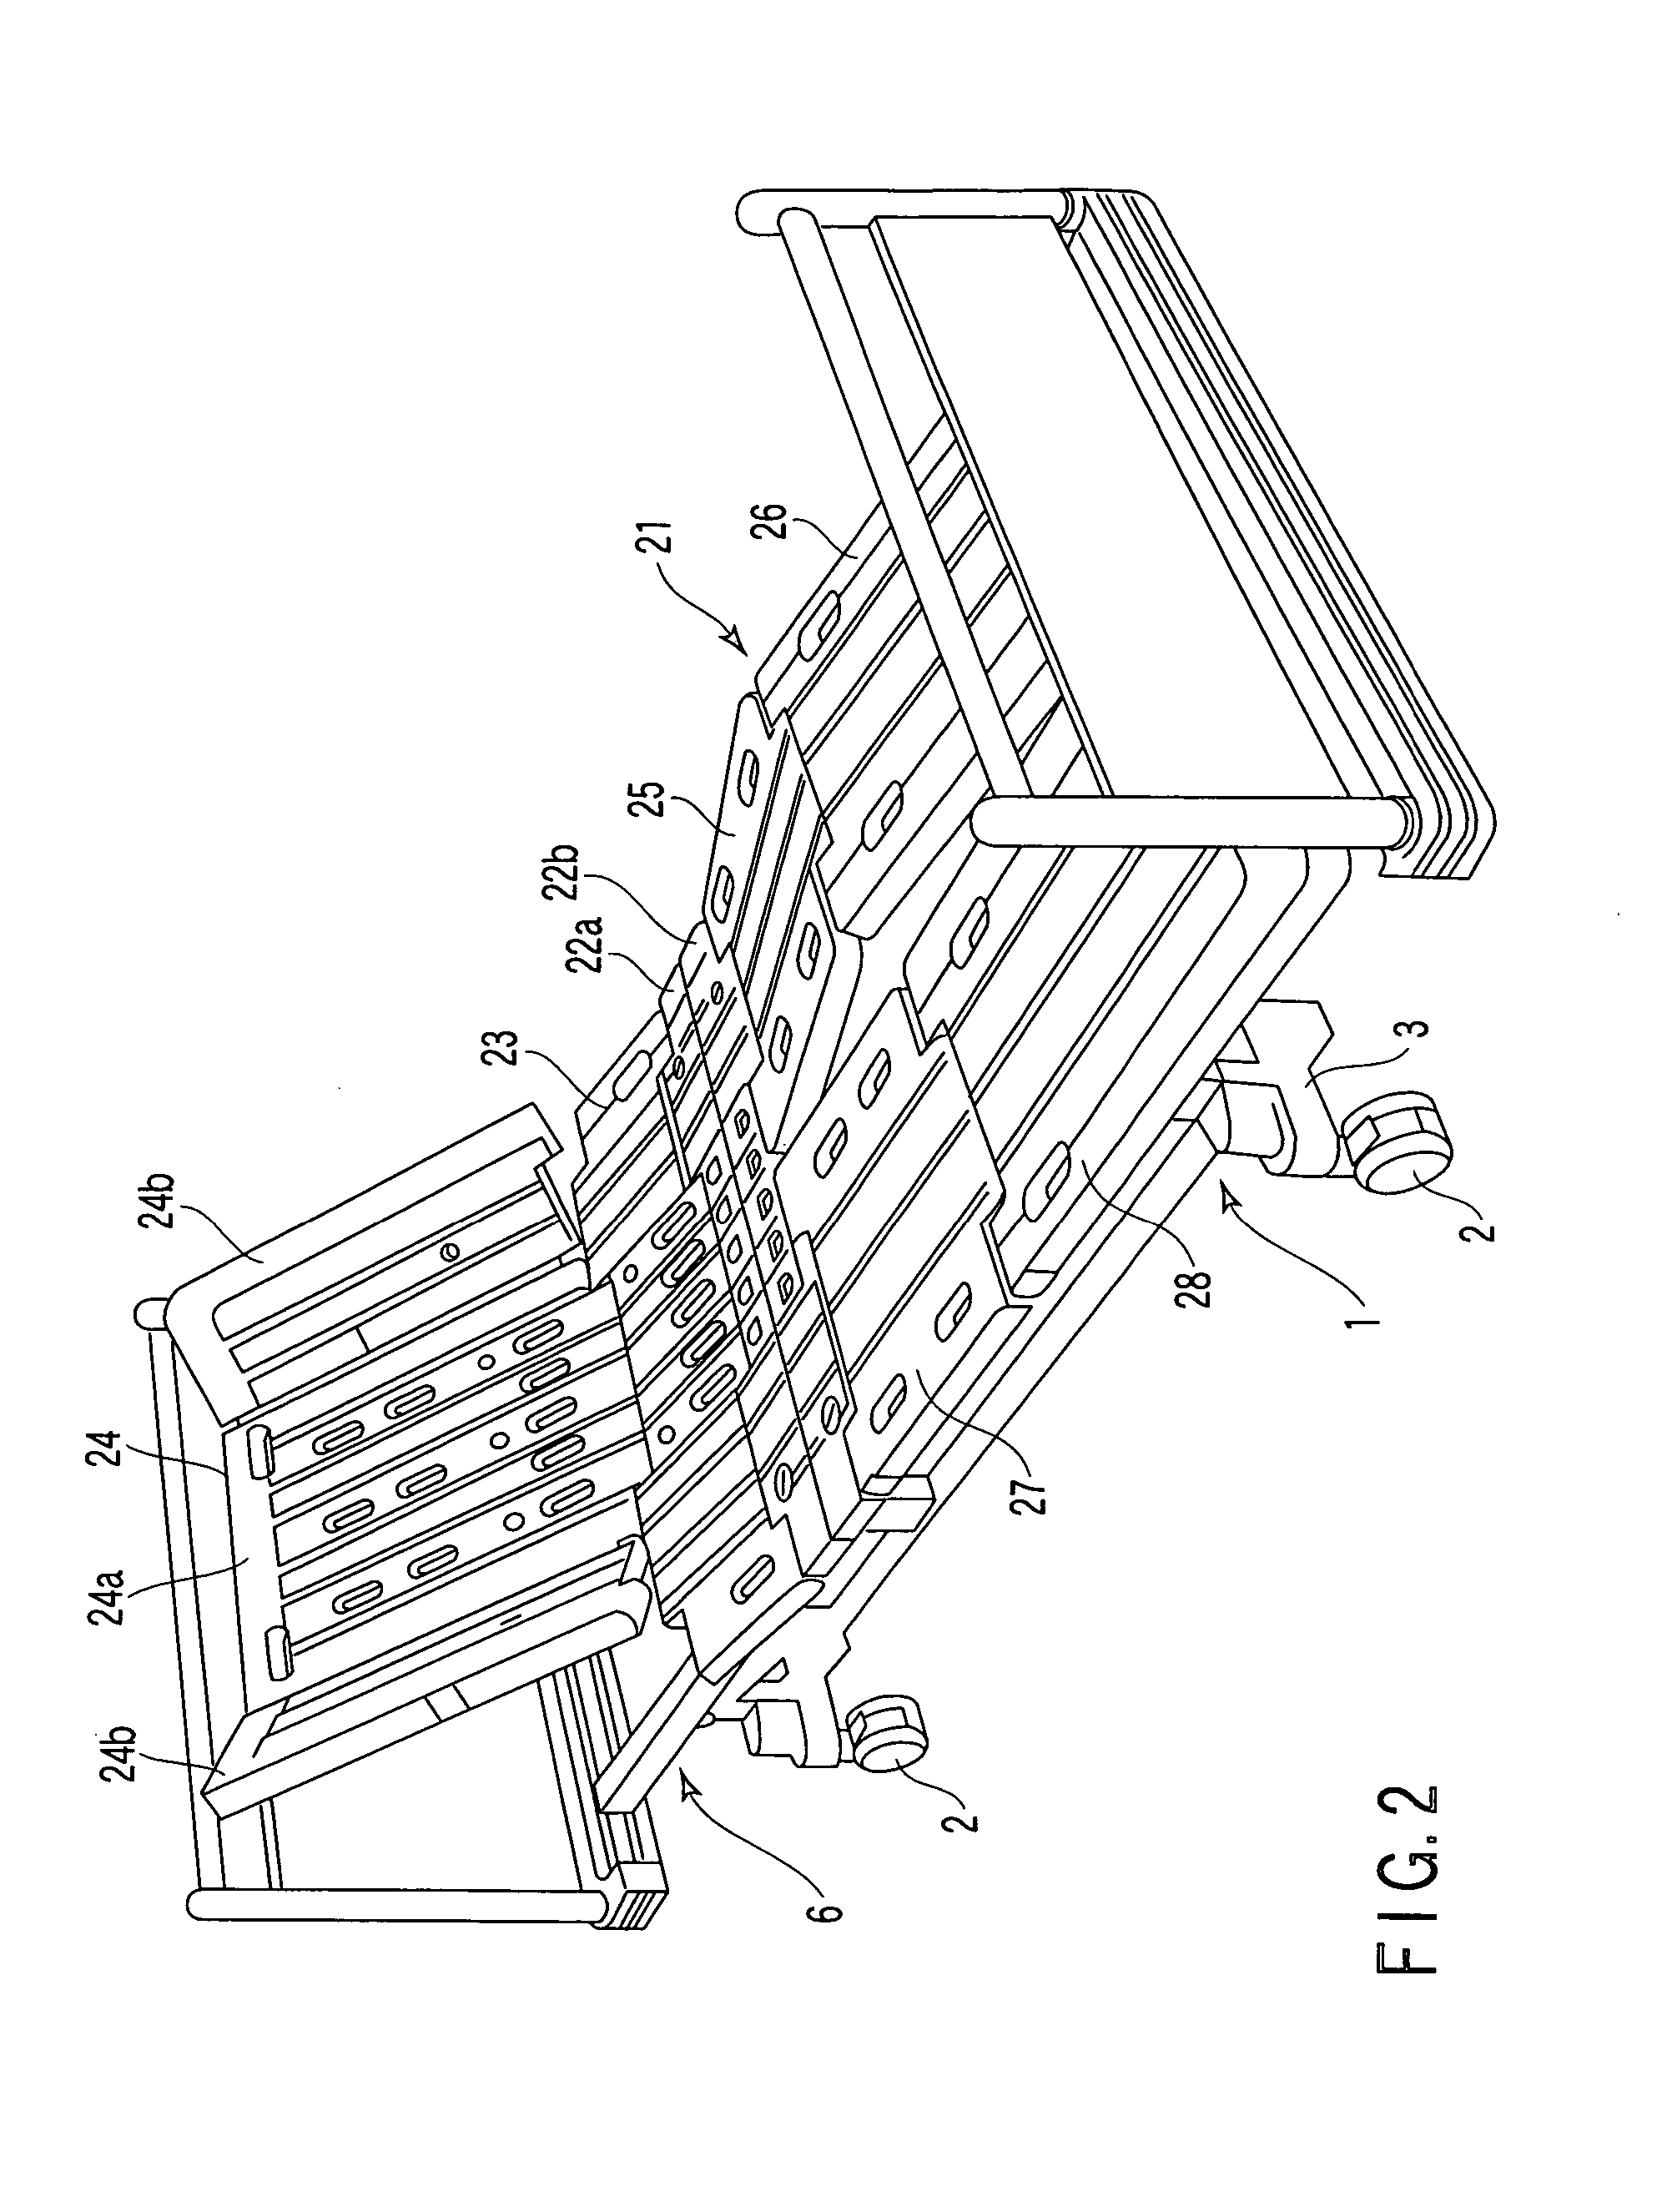 Rising-type bed apparatus and mattress